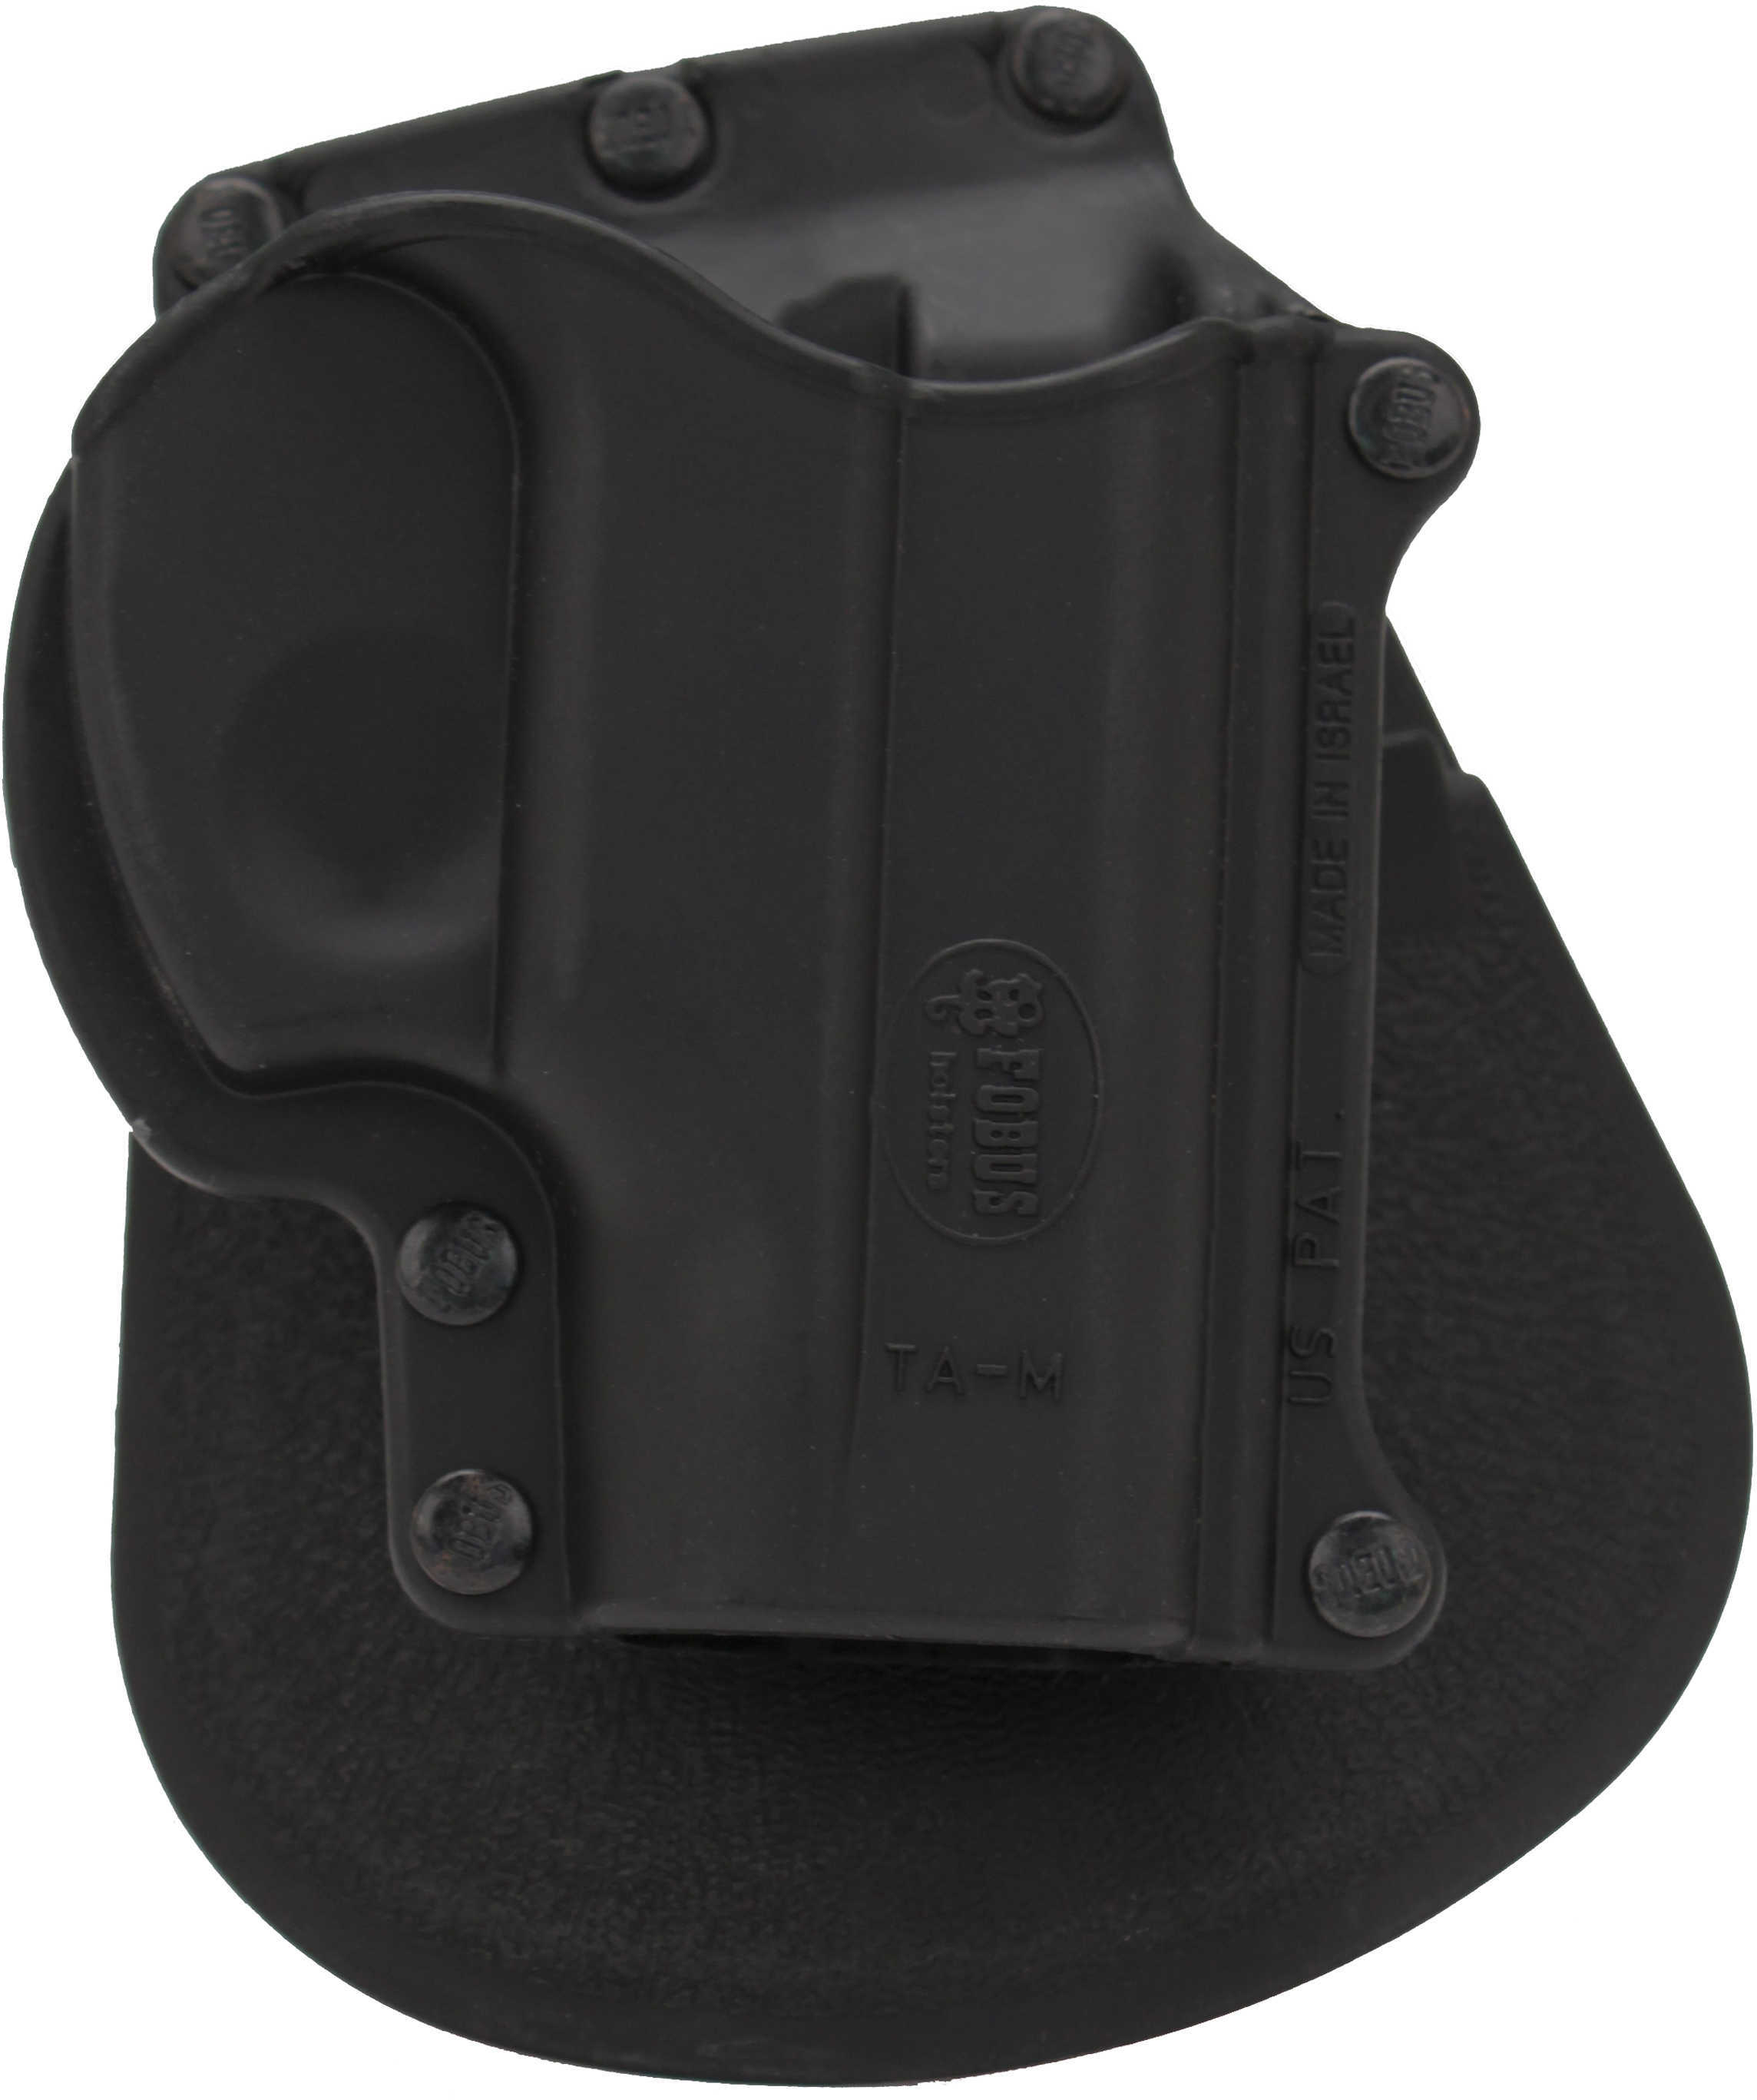 Fobus Paddle Holster Fits Taurus Millennium 32/380/9mm Pro Models Refer To SP11B Right Hand Kydex Black TAM